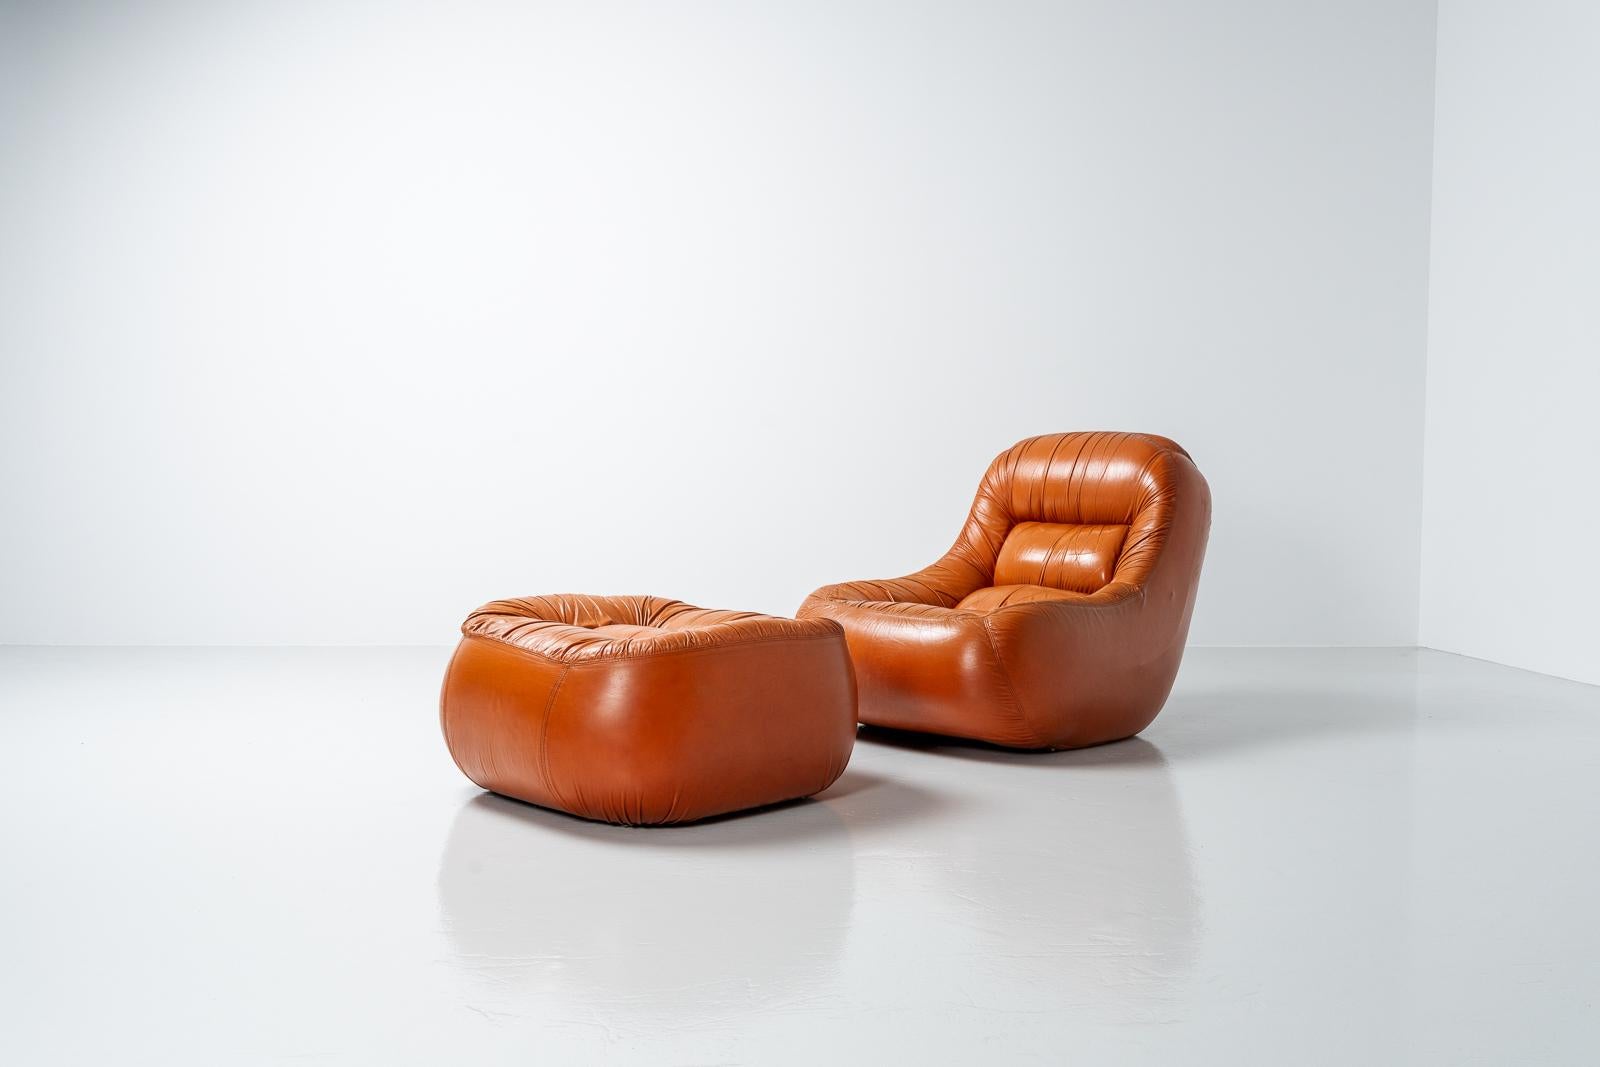 Very cool shaped lounge chair designed by Jonathan de Pas, Donato D'urbino and Paolo Lomazzo, made by BBB Bonacina, Italy 1969. This chair has a nice cognac leather upholstery and the structure is fully covered in foam which makes this a comfortable